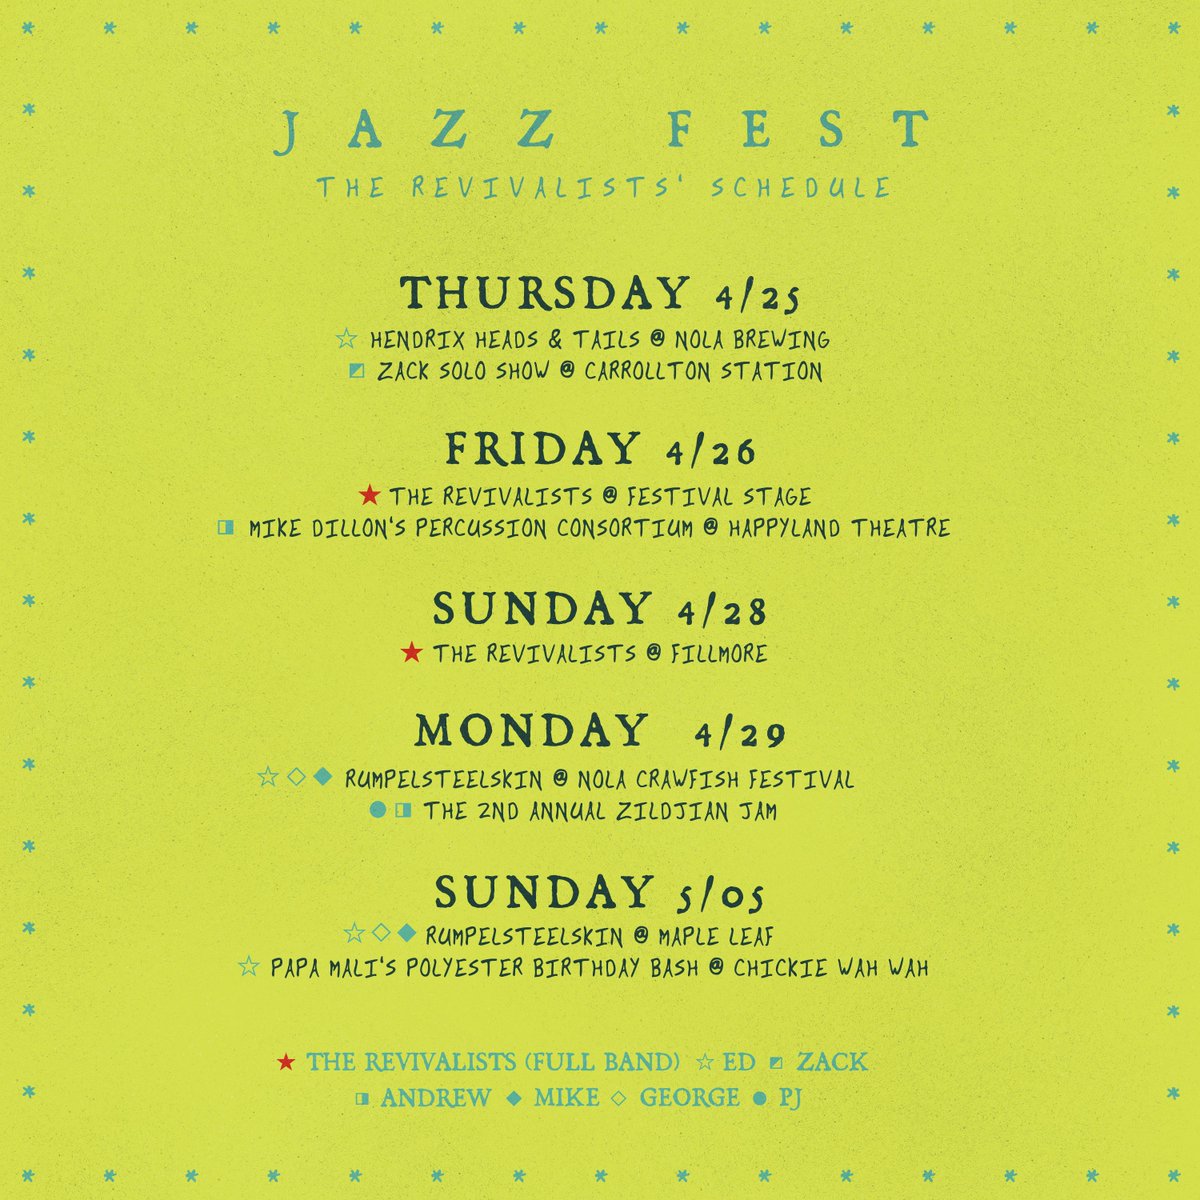 It's that time of the year in New Orleans. Let's get it @jazzfest!